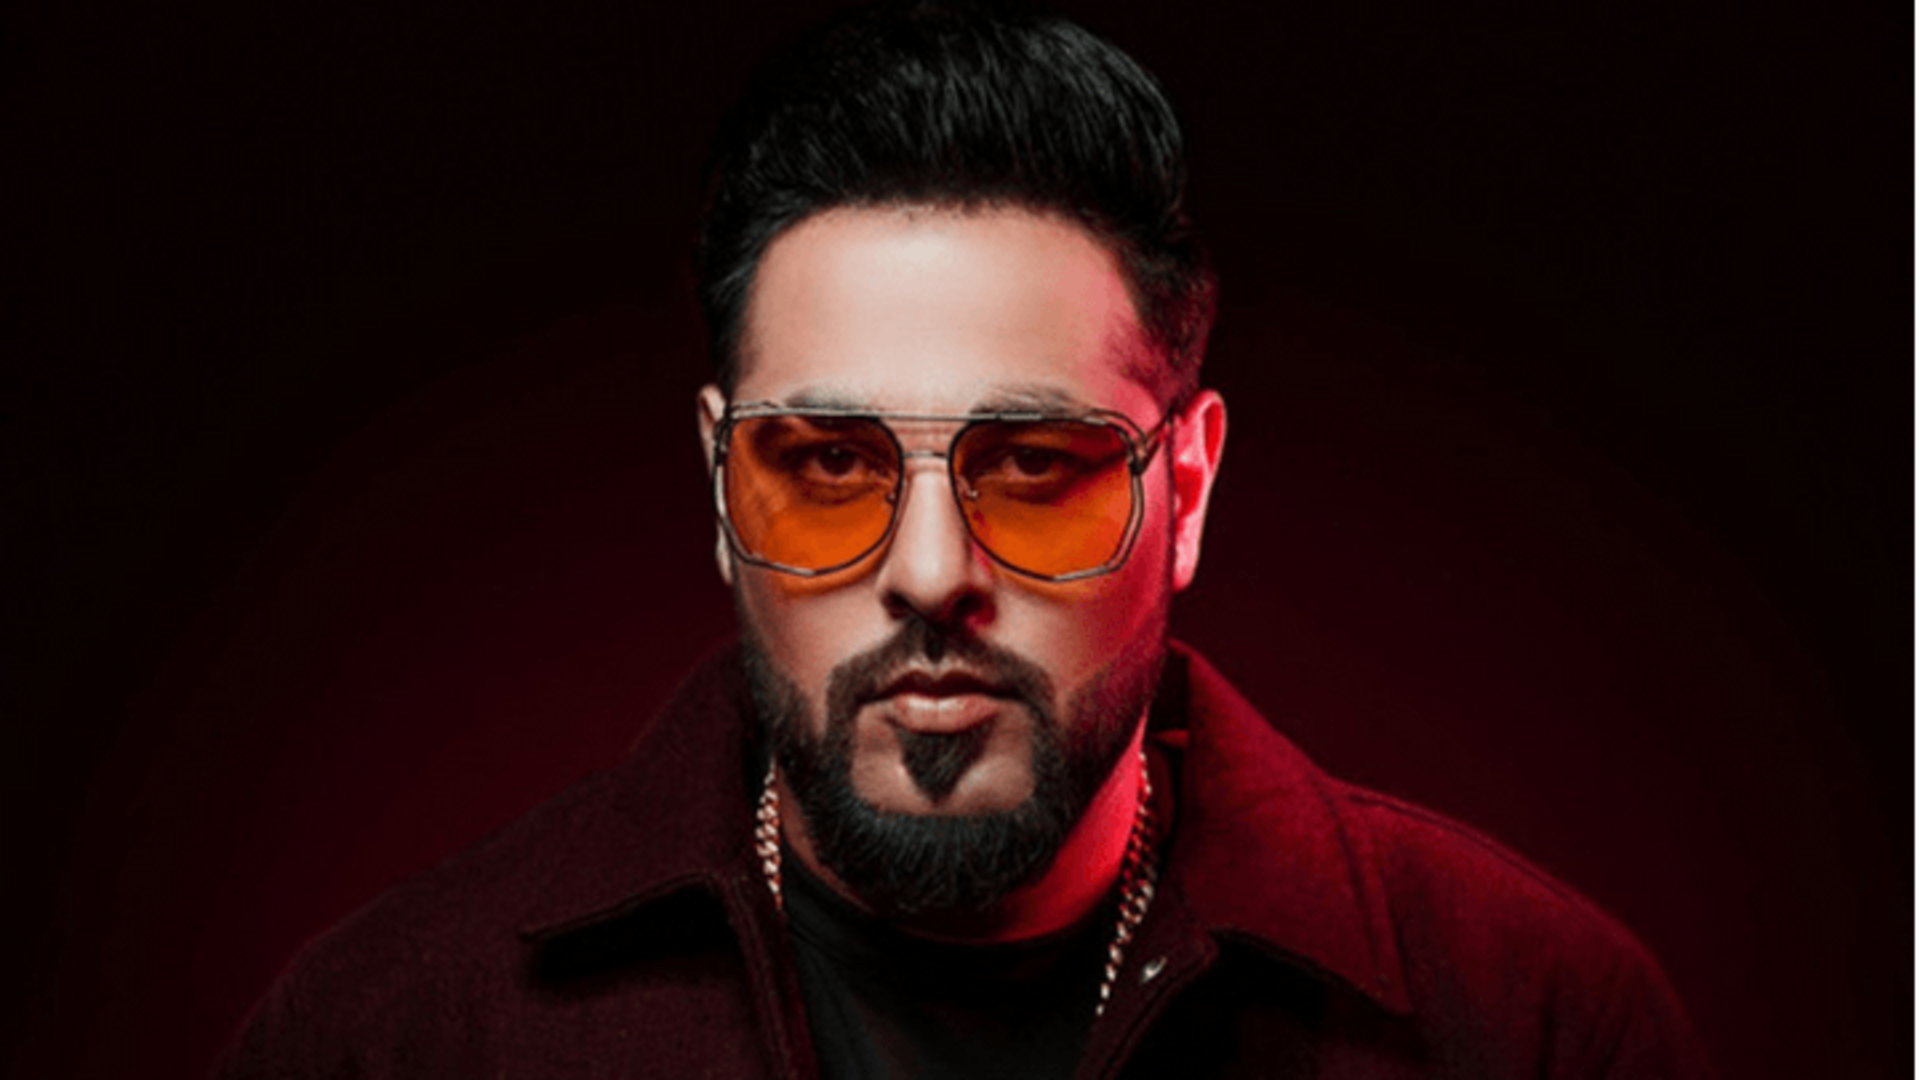 Controversy explained: Why did Badshah apologize over his song 'Sanak' 